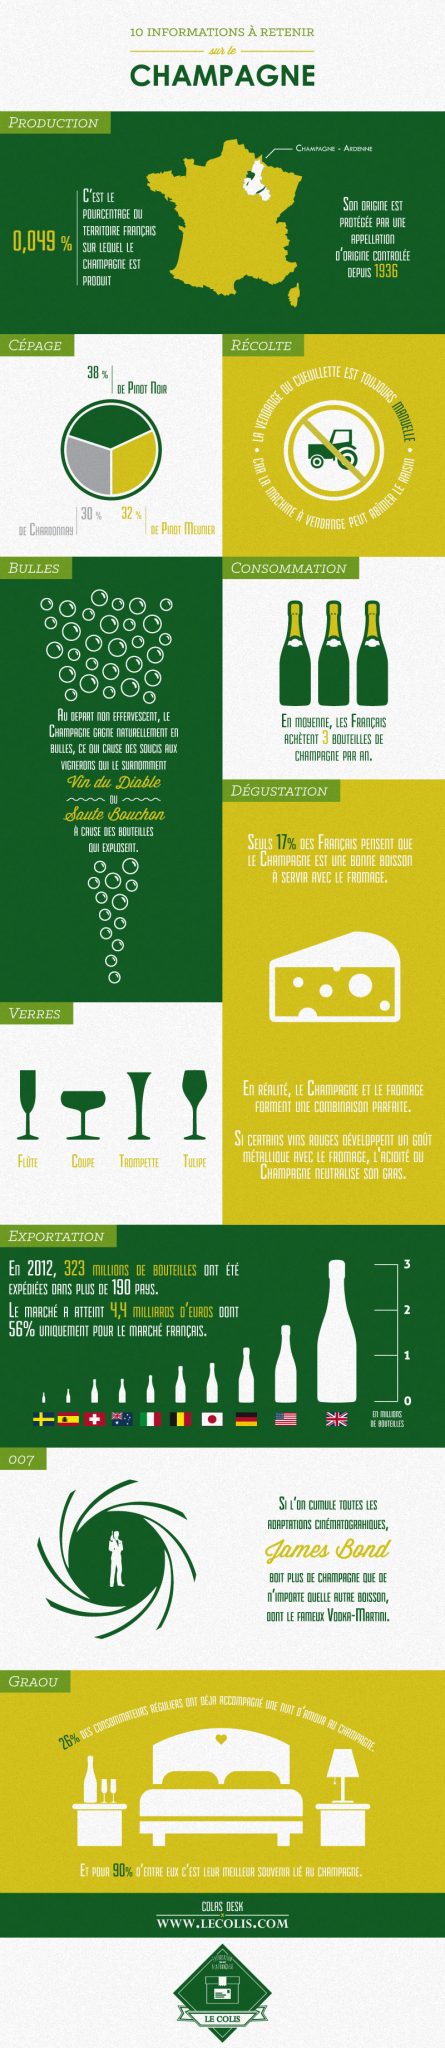 infographie champagne